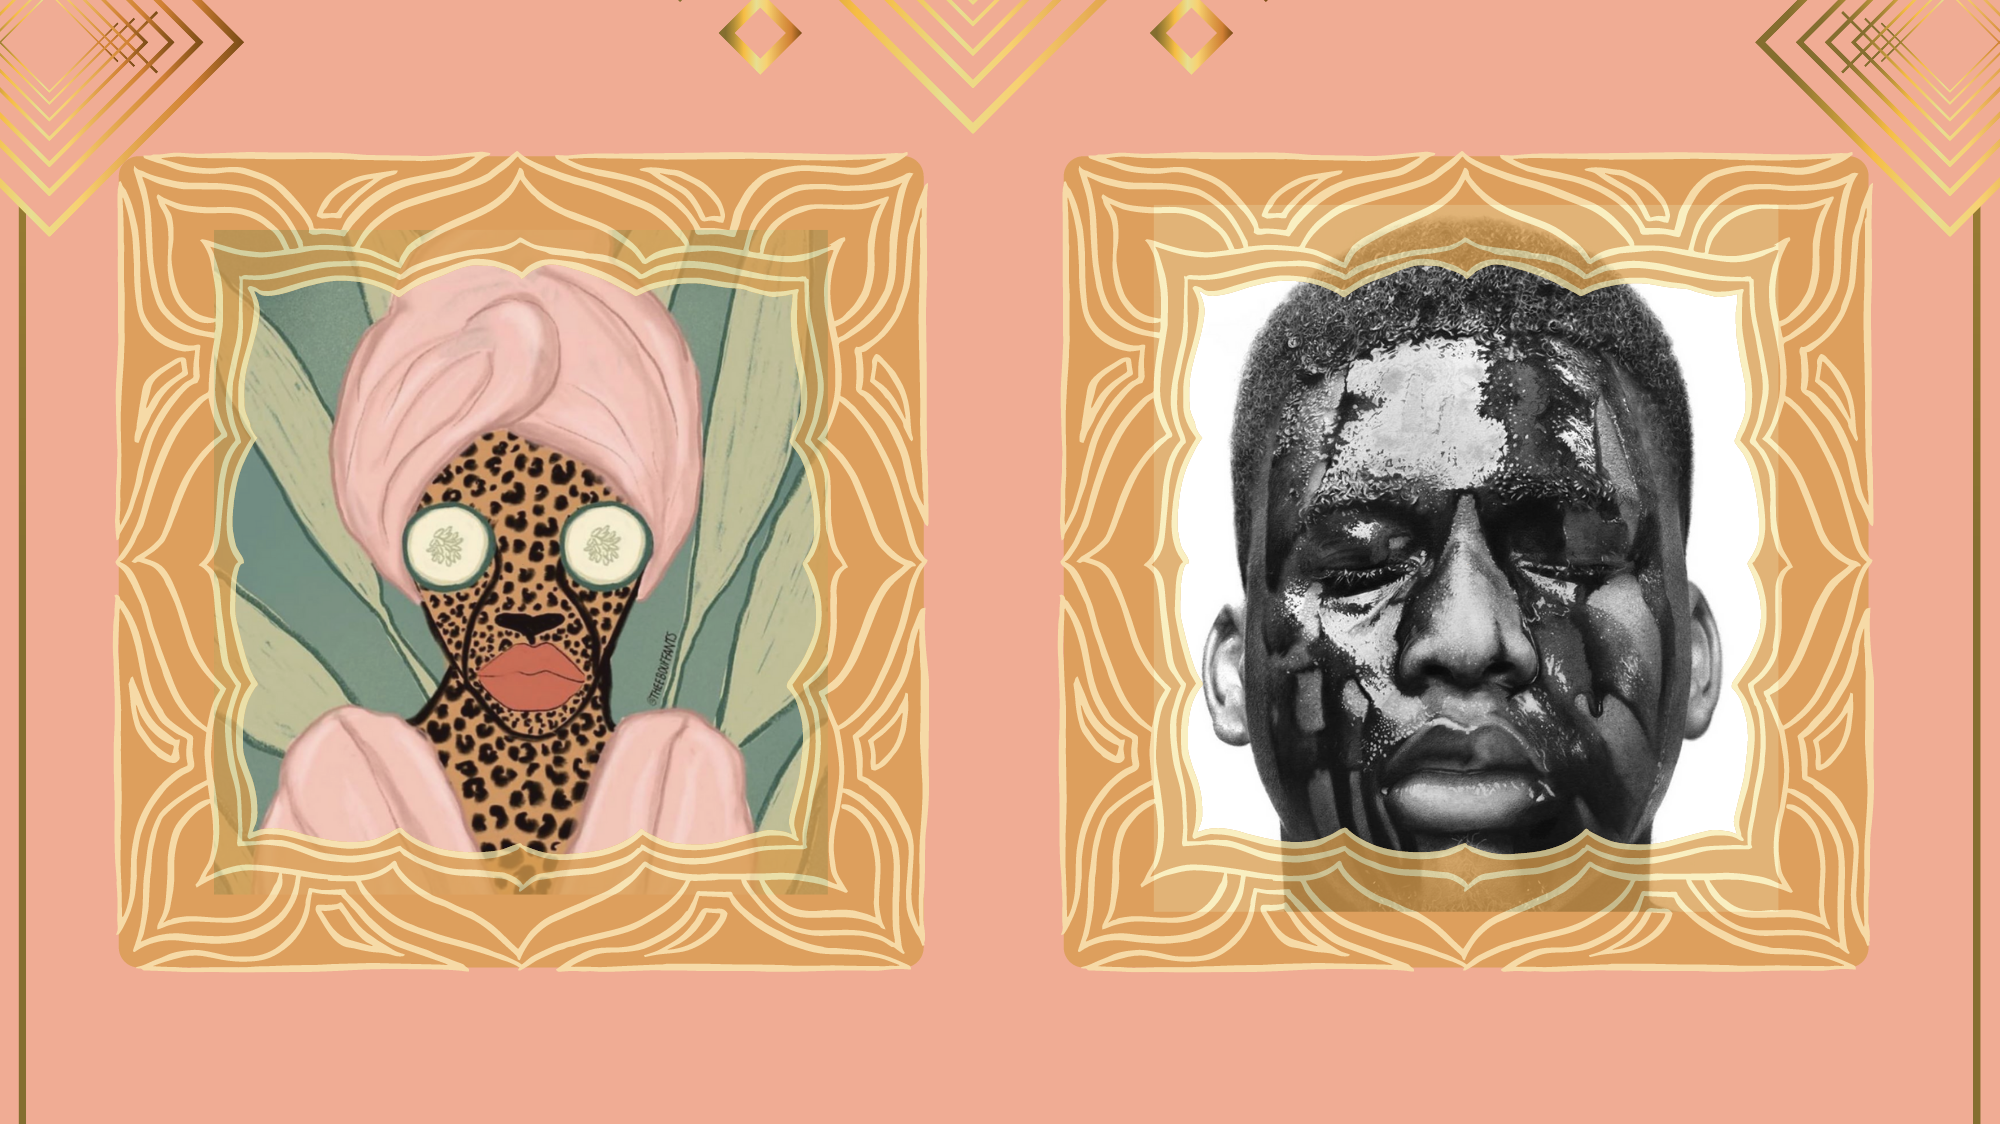 Side-by-side images of artwork by Kendra Dandy and Arinze Stanley